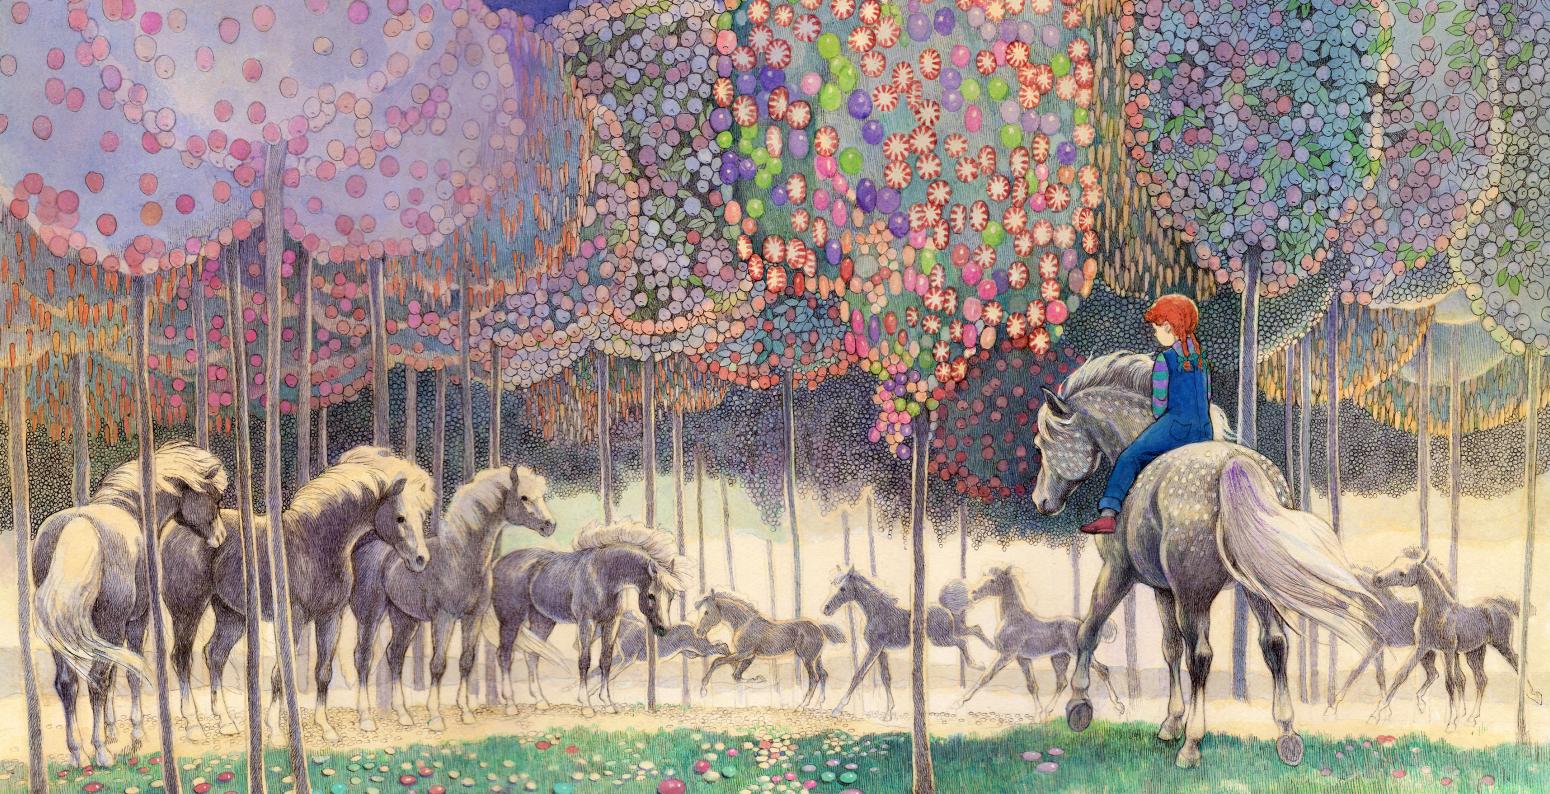 A girl sits on a gray spotted horse, surrounded by ten other horses and colorful trees.